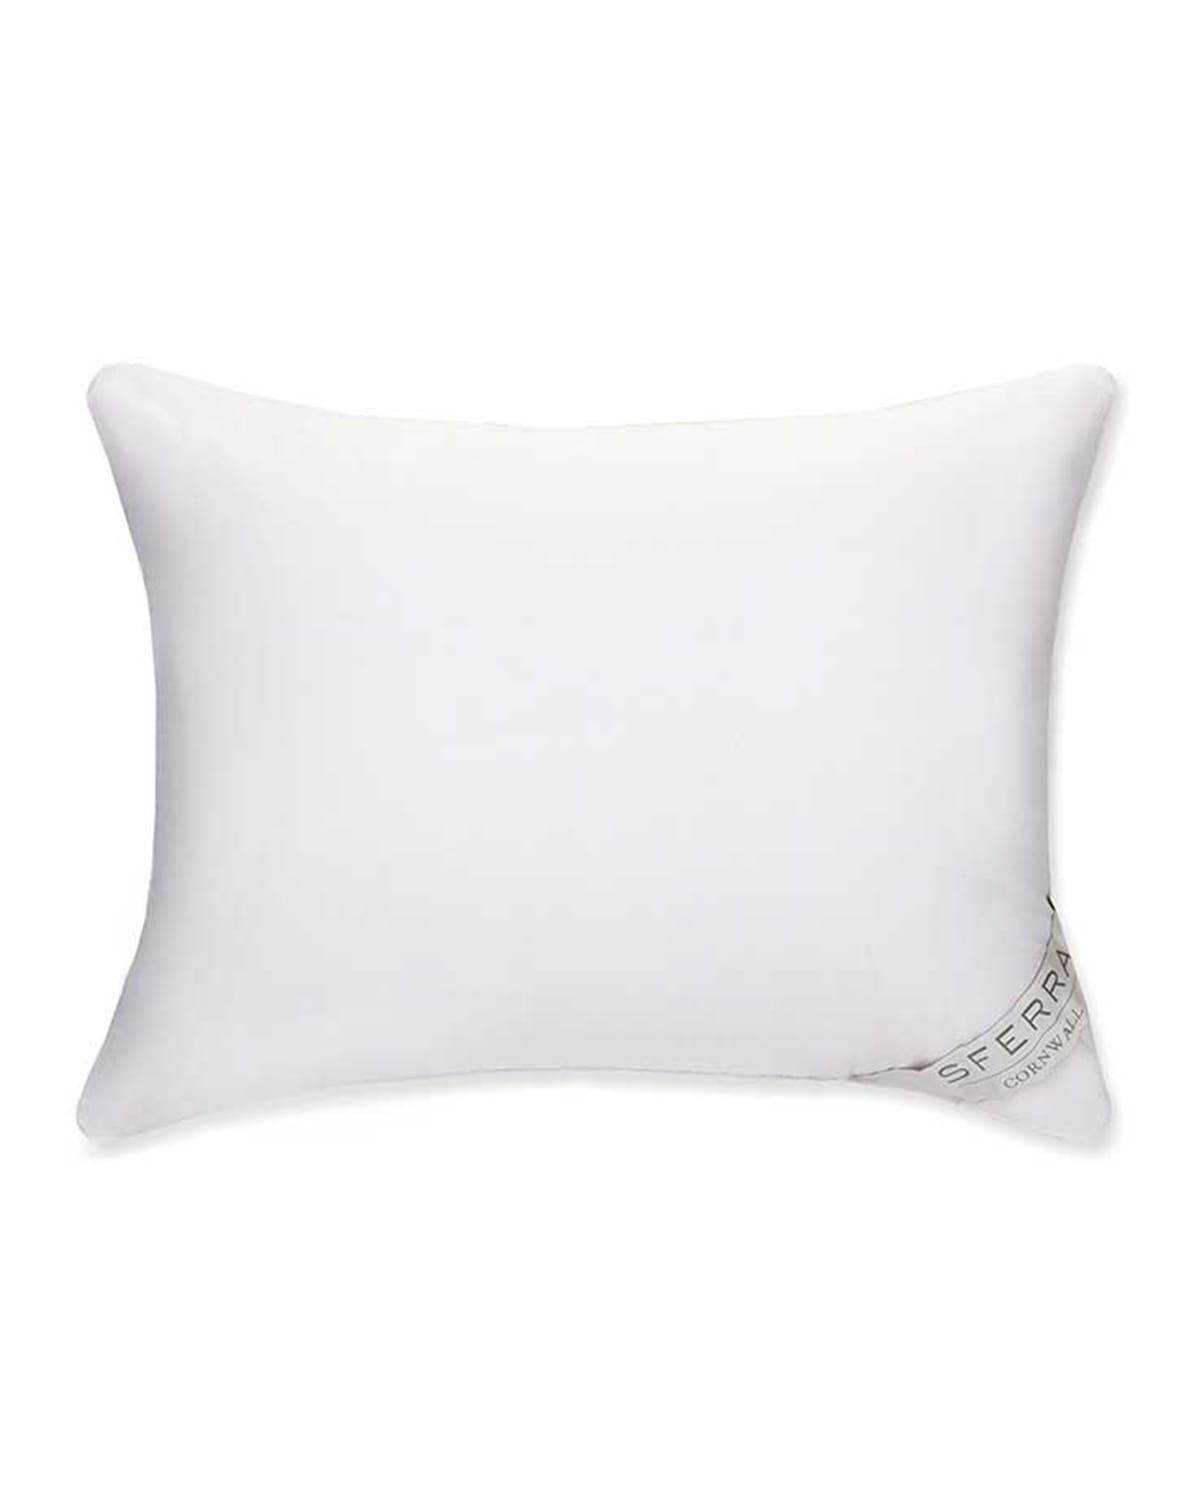 Sferra Cornwall Firm Down Pillow, King In White